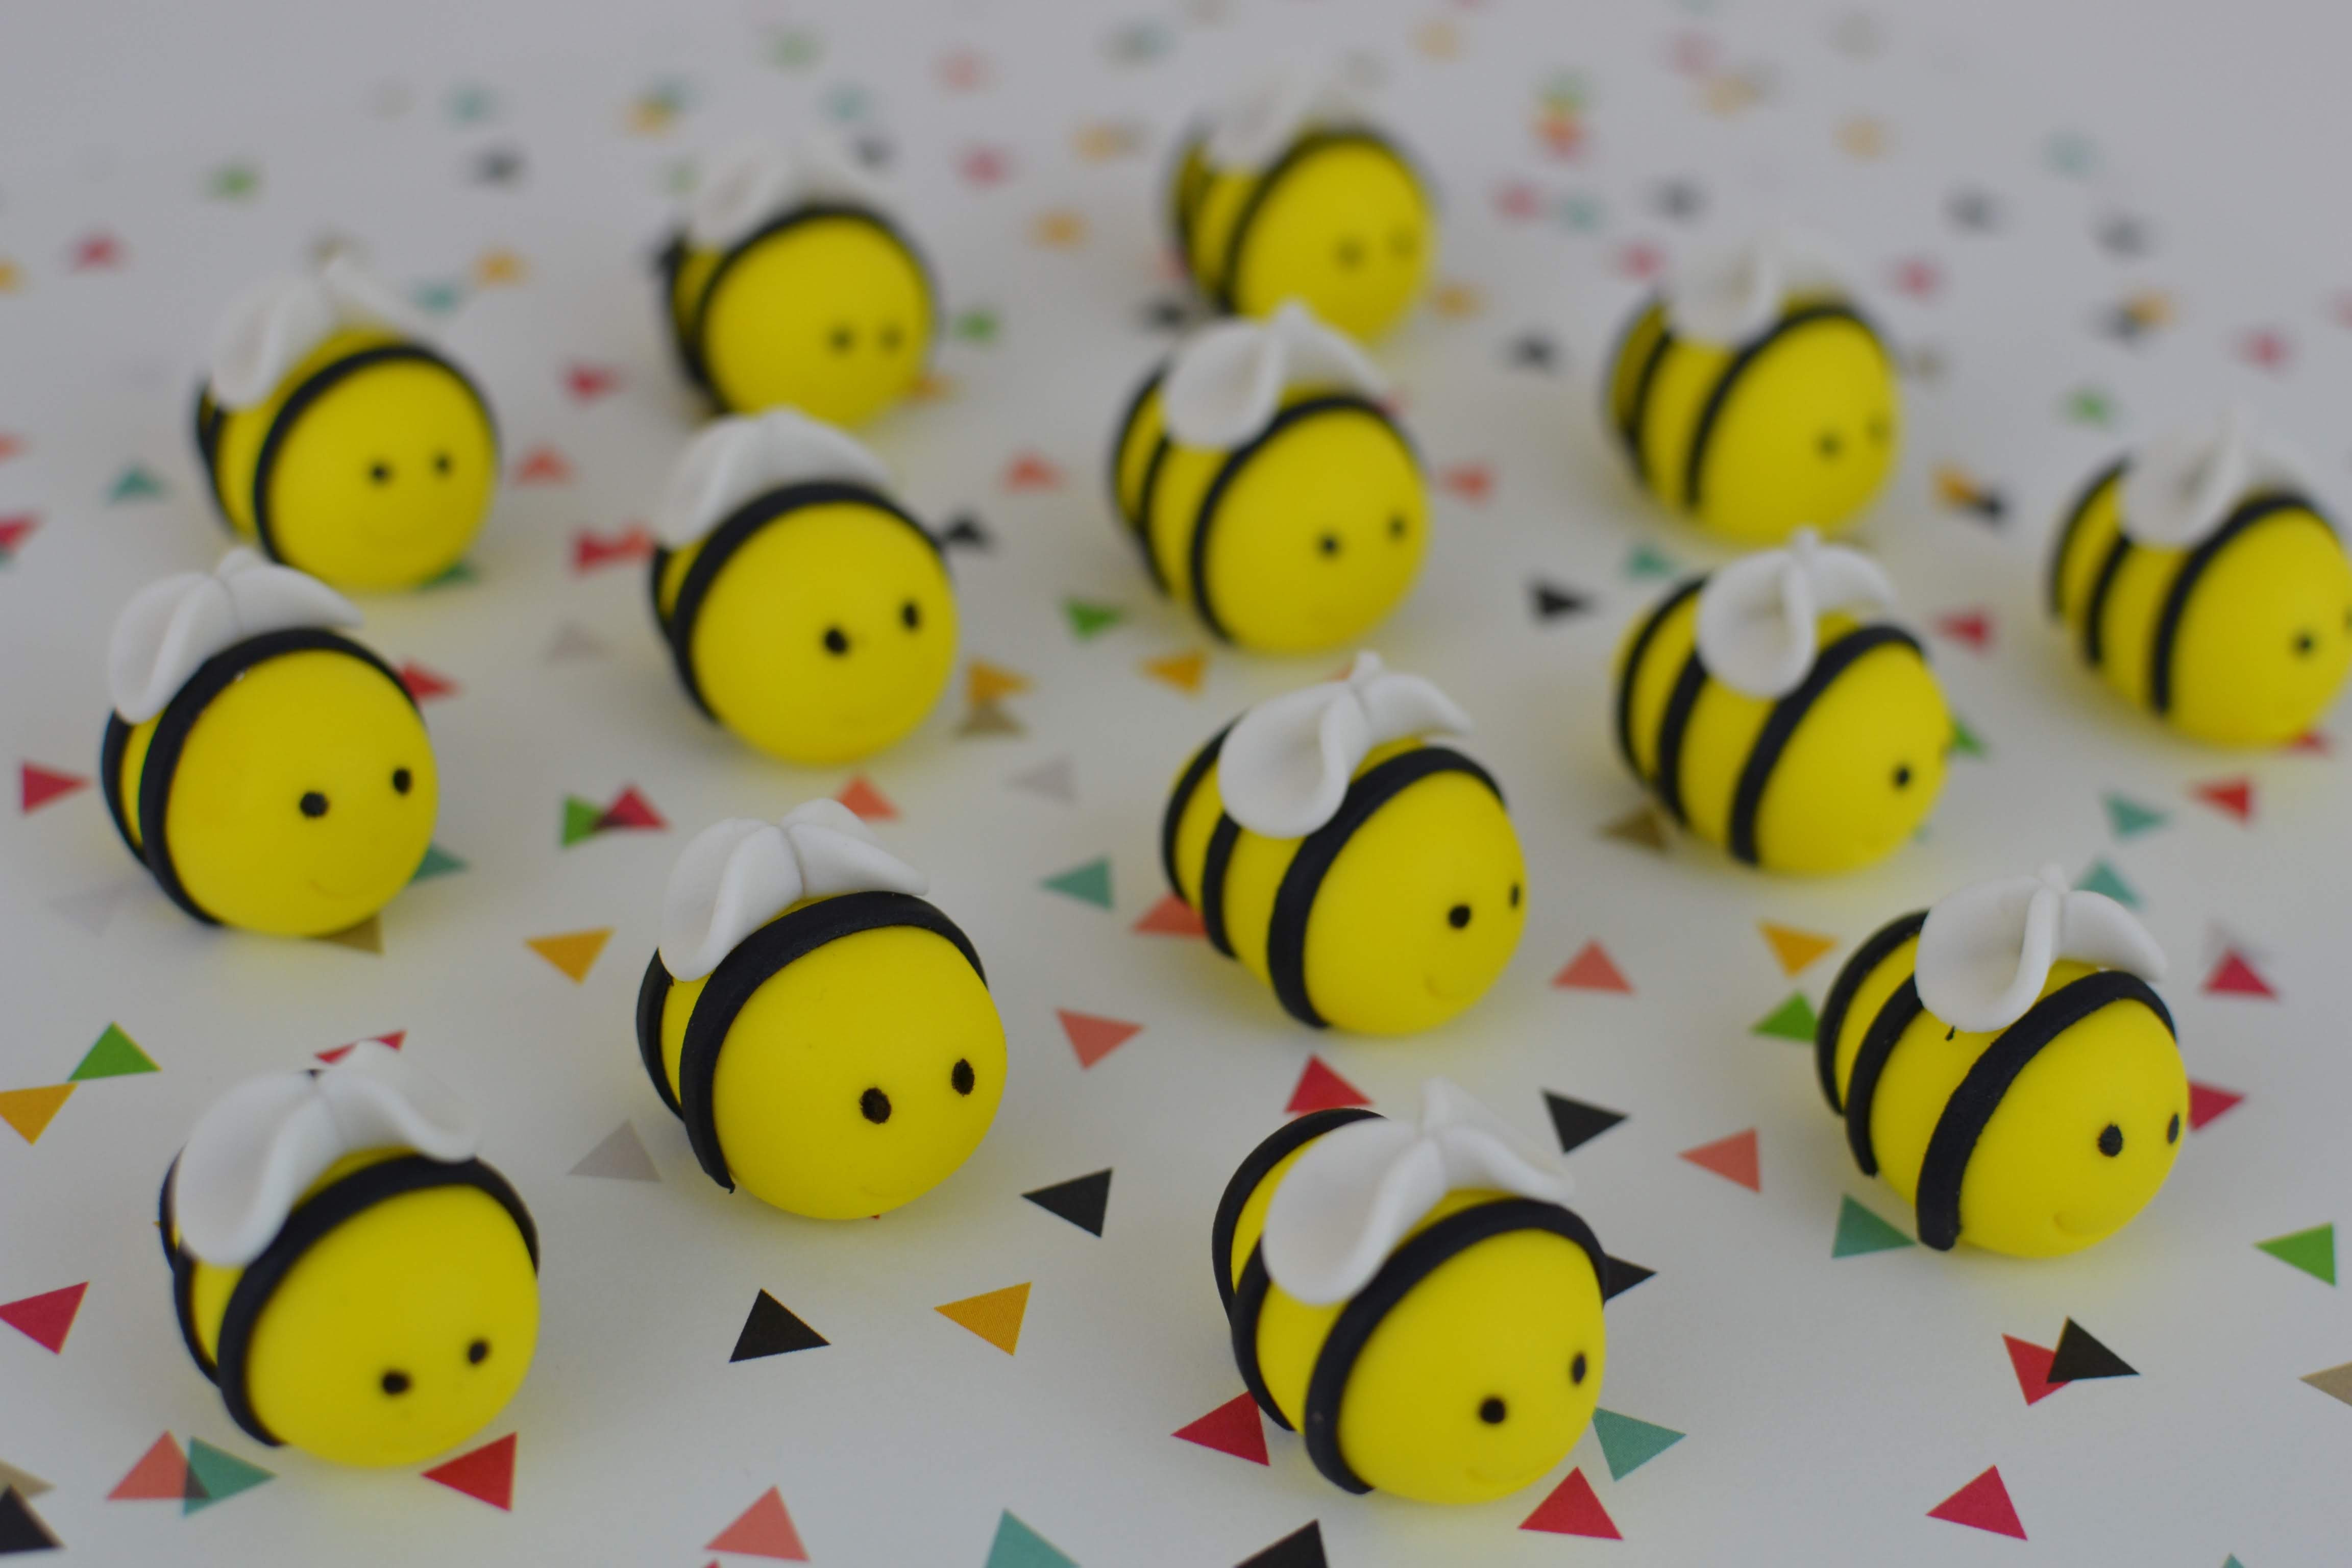 Bumble bee cake decorations